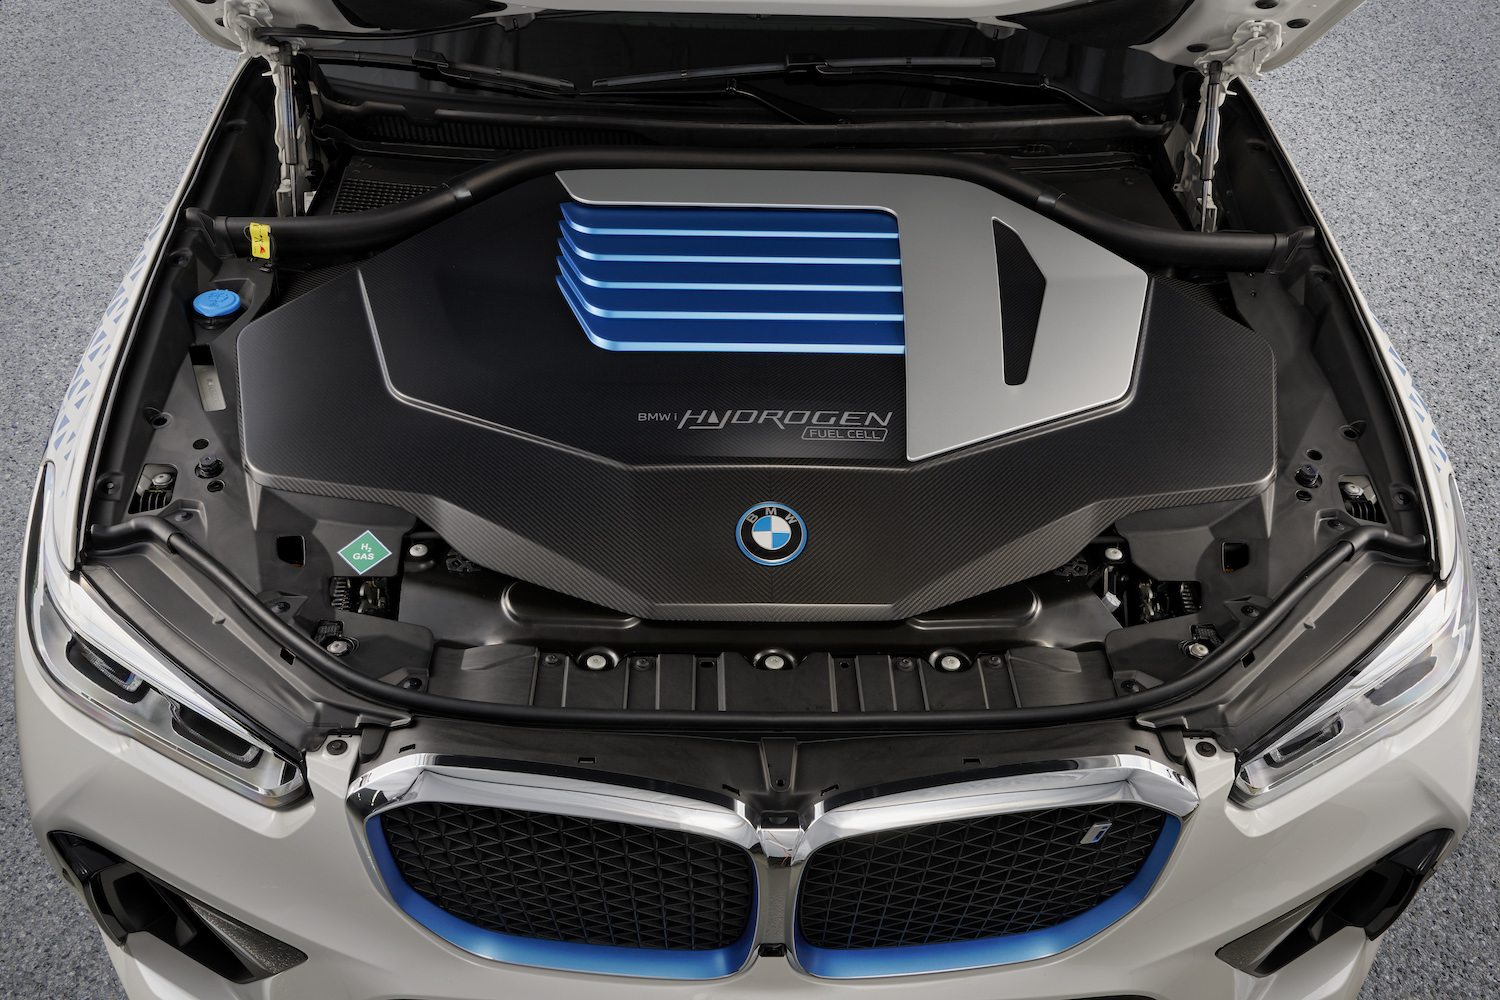 Close up photo of BMW iX5 Hydrogen fuel cell engine underneath the hood.